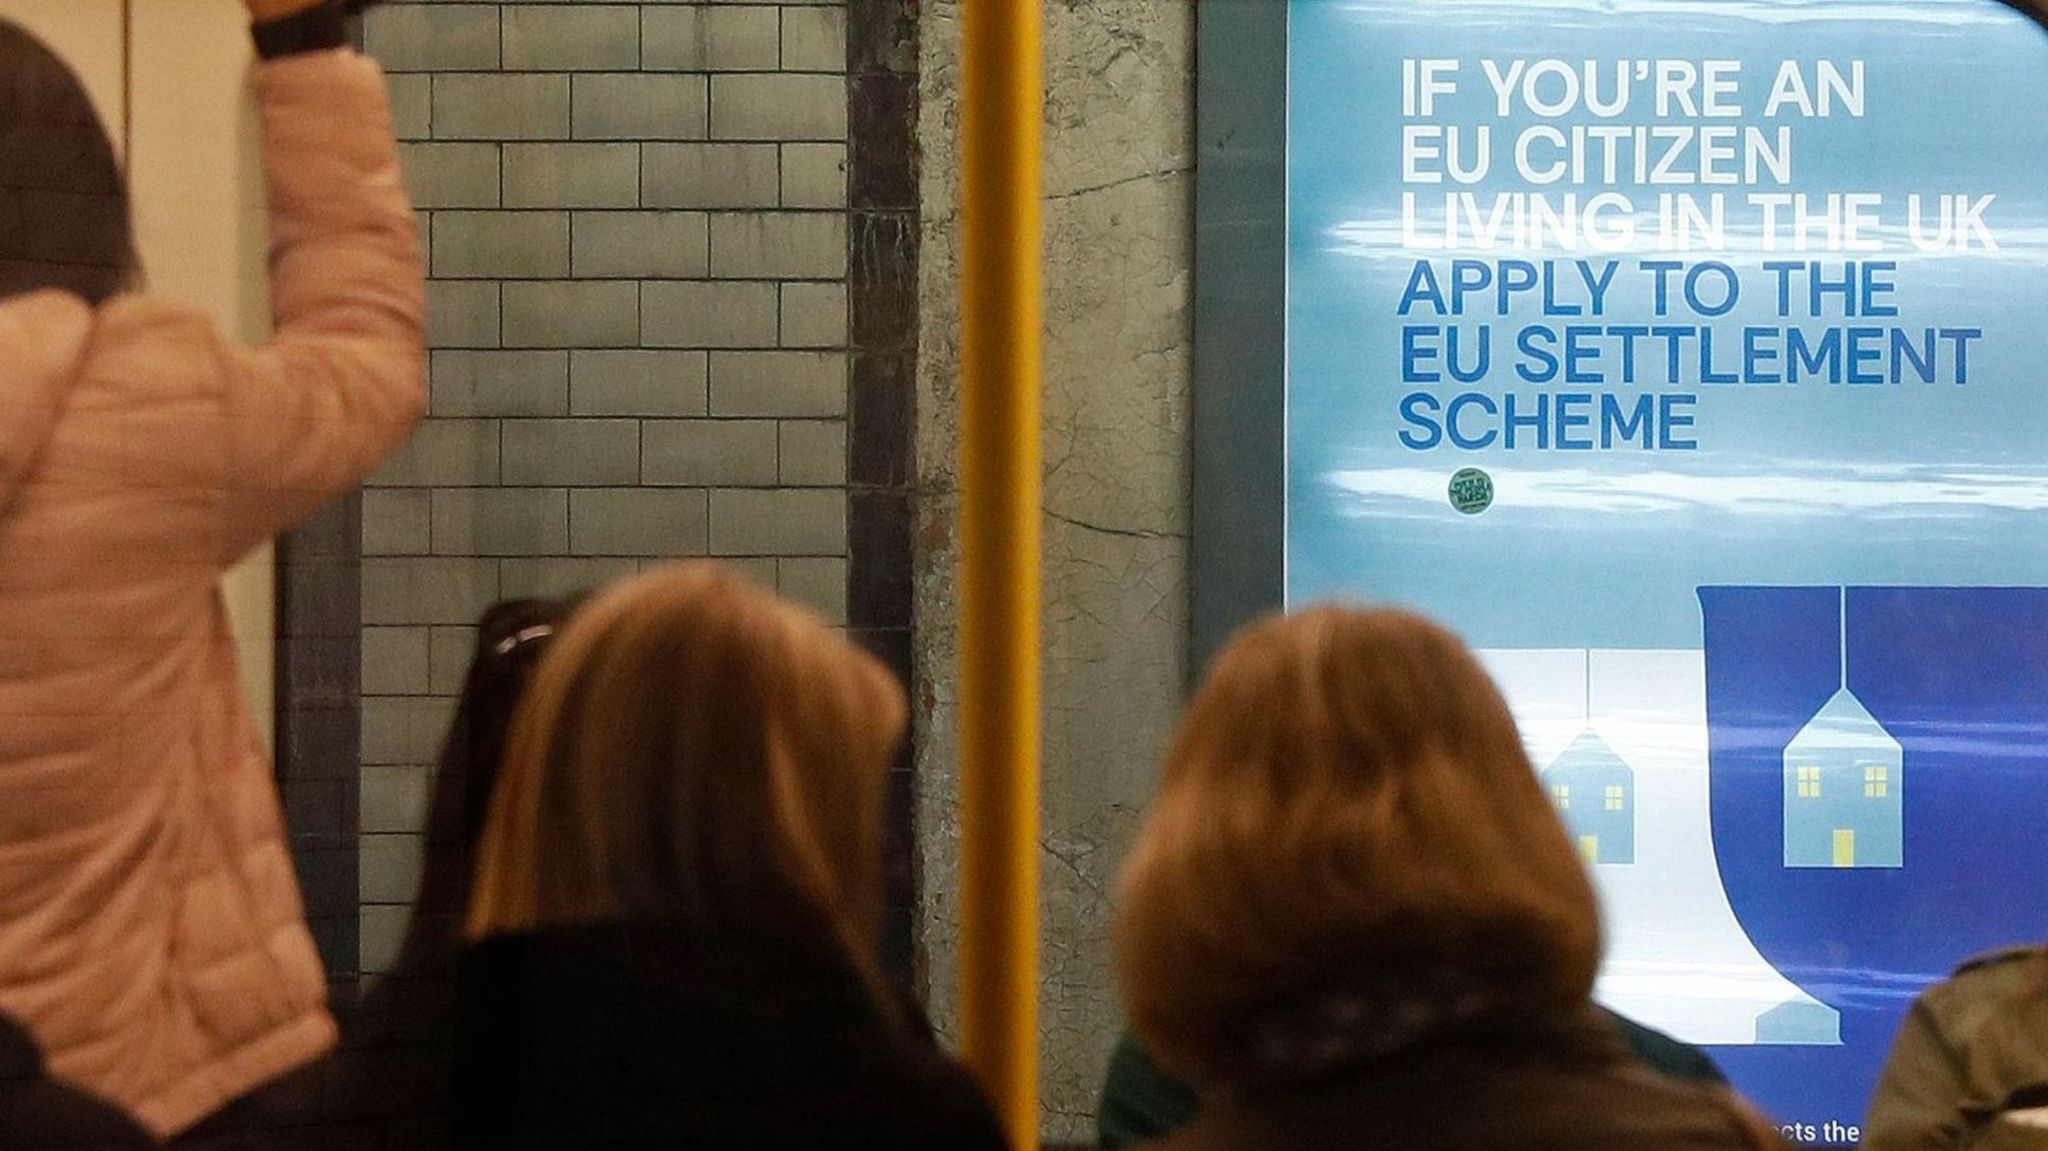 A poster encouraging EU nationals to apply to the government's post-Brexit EU settlement scheme is pictured through a carriage of a London Underground tube train